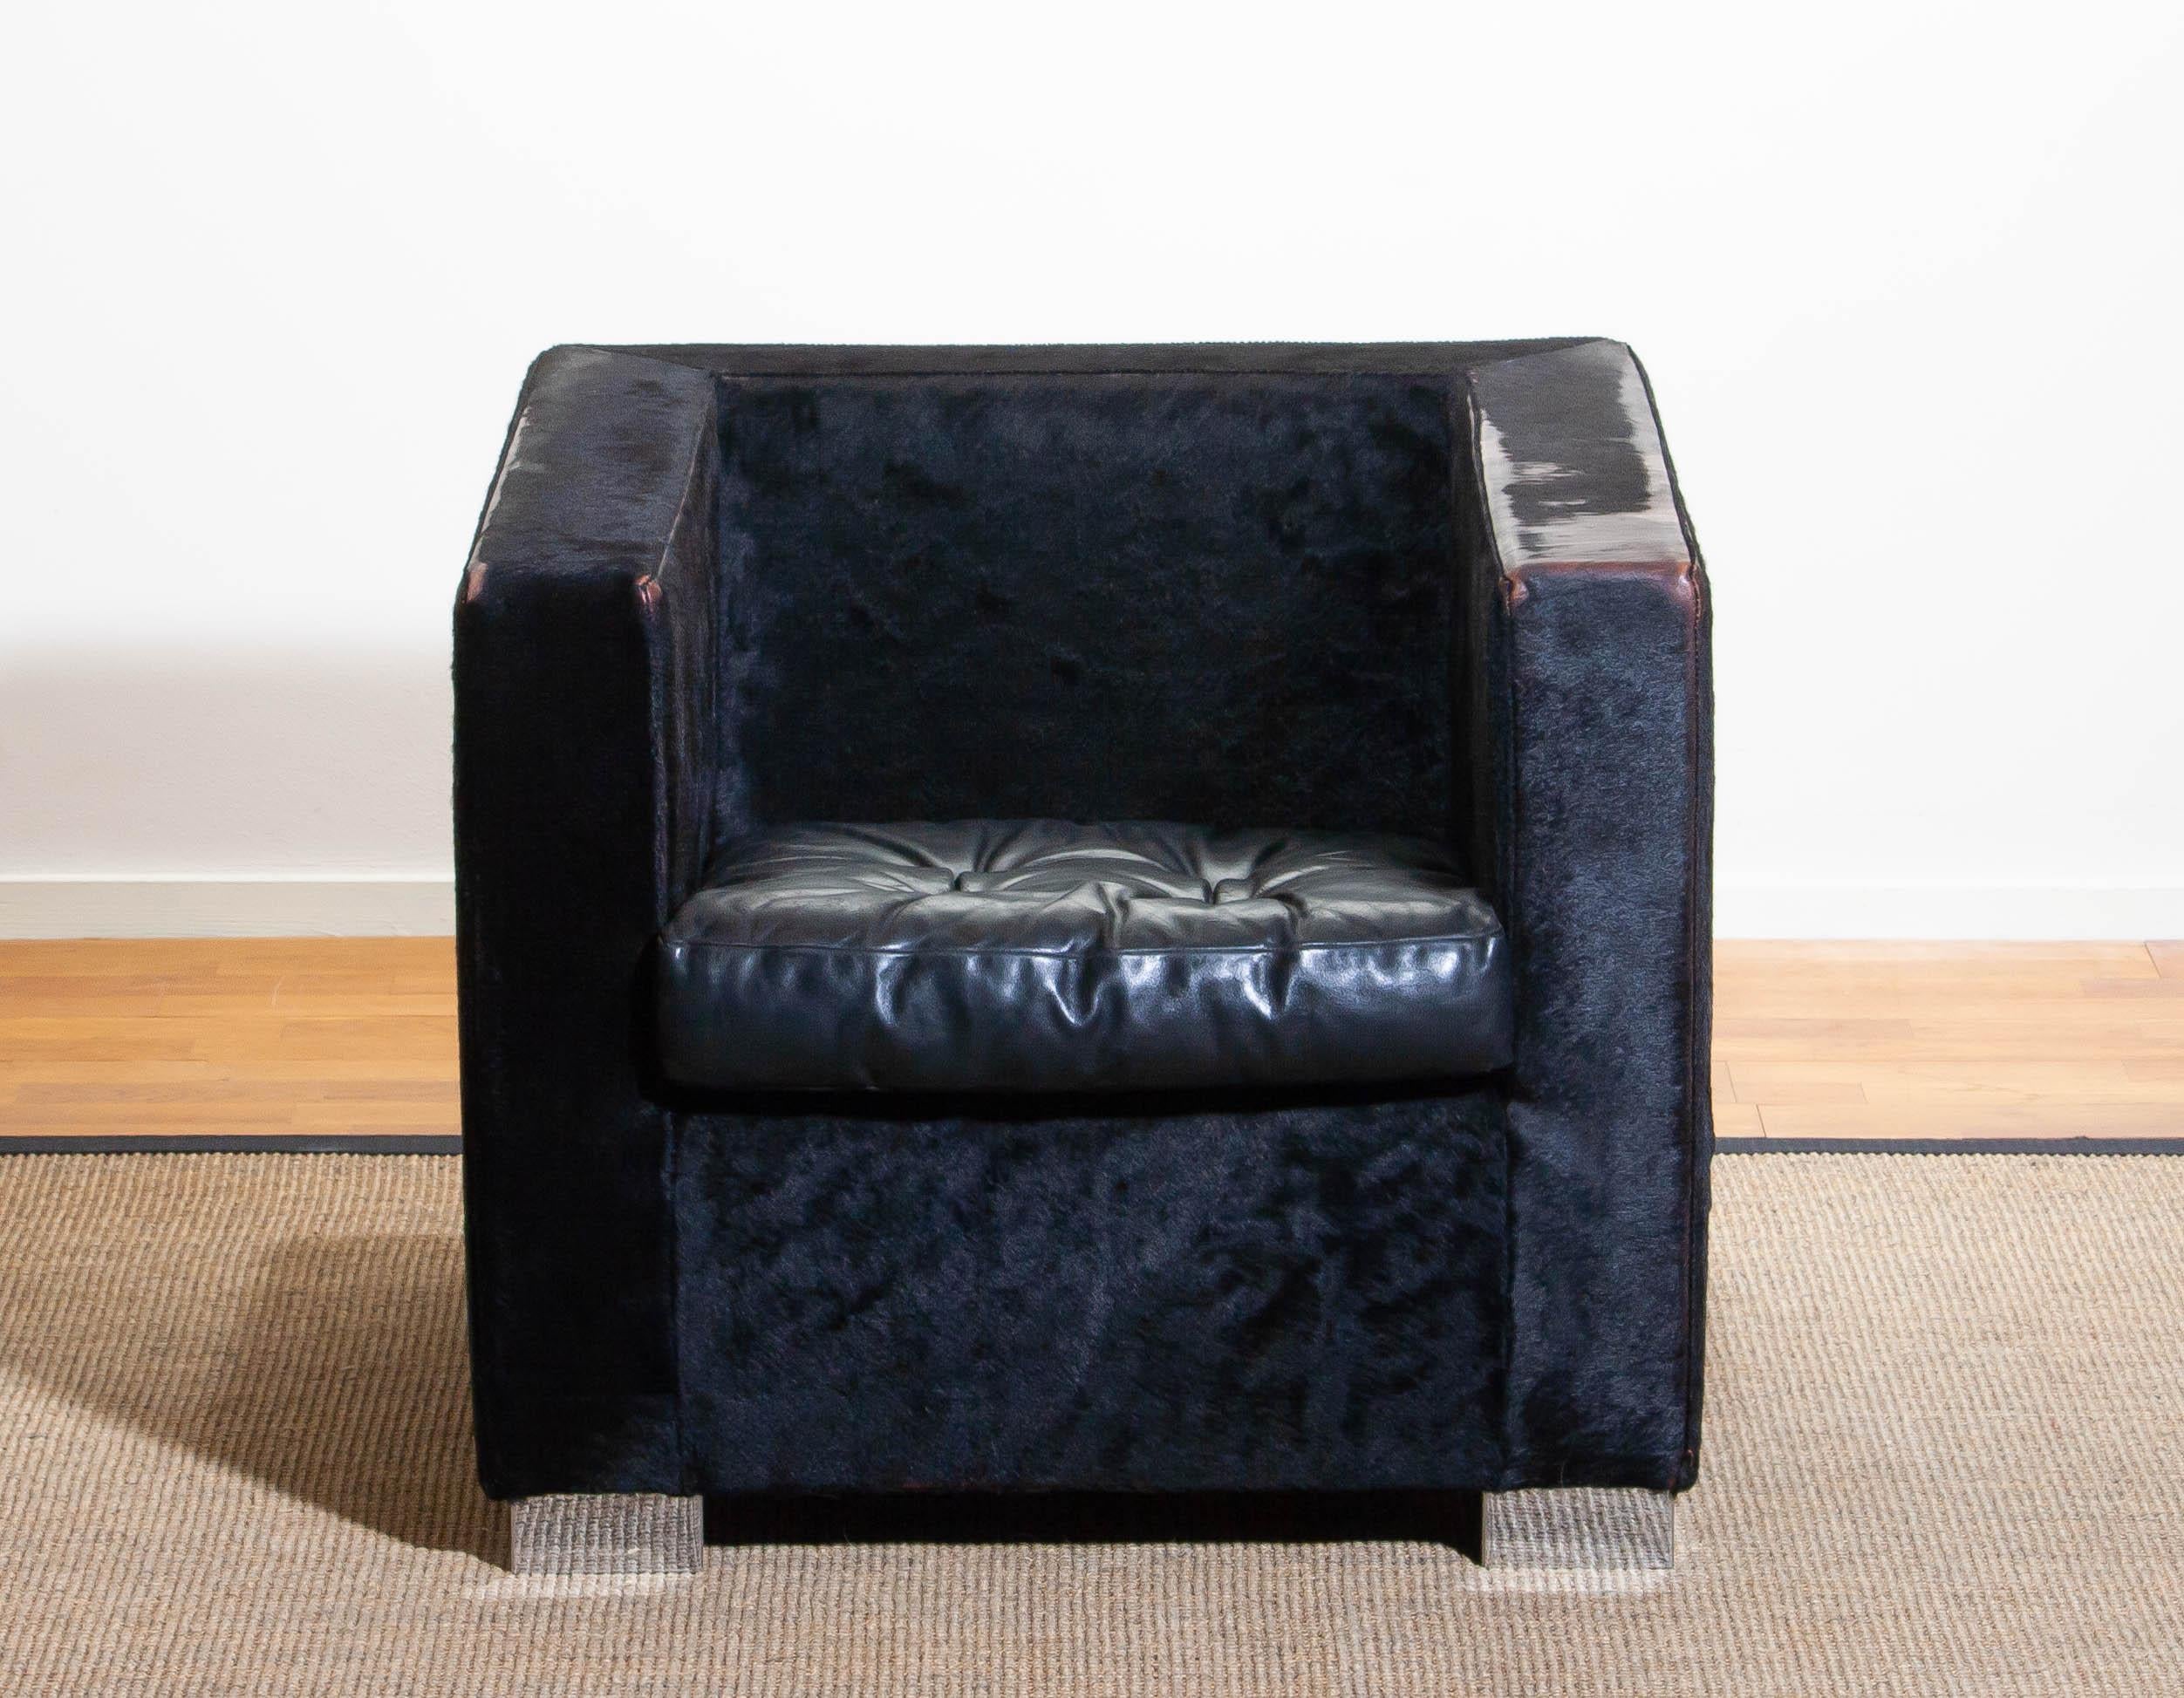 1990s, Black Lounge Chair in Pony and Leather by Rodolfo Dordoni for Minotti (Moderne der Mitte des Jahrhunderts)